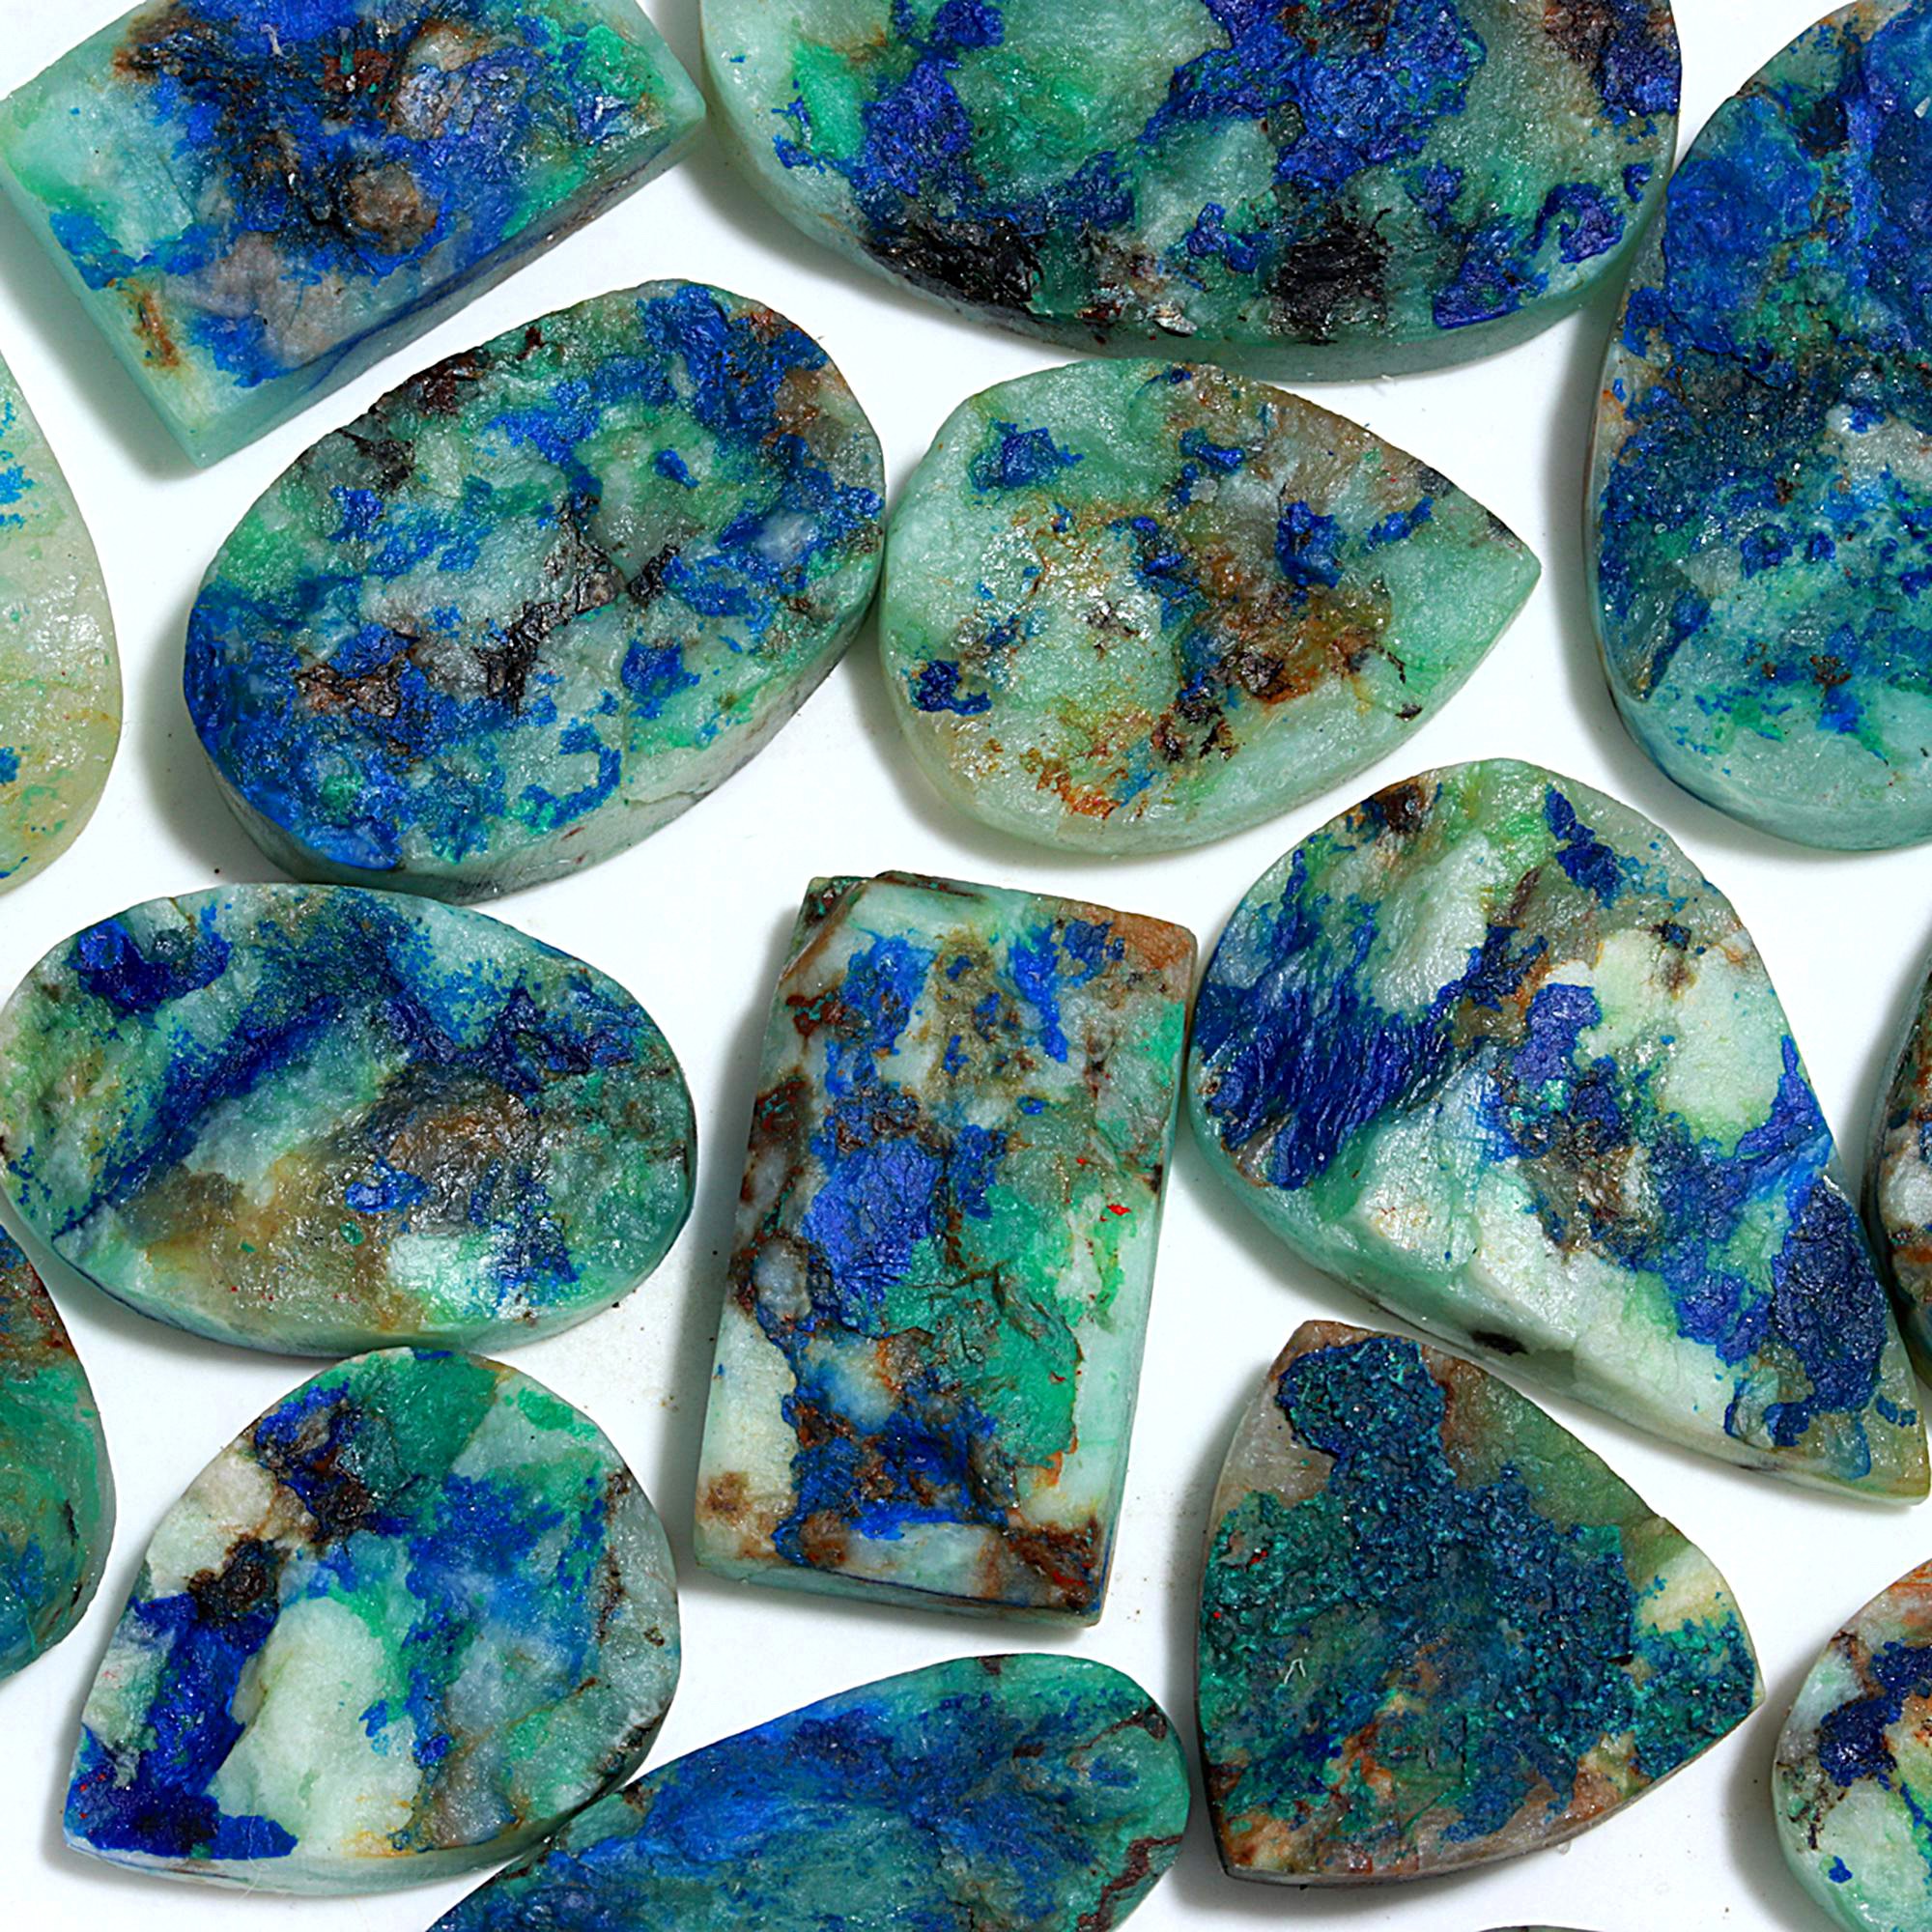 17 Pcs 582.Cts Natural Azurite Druzy Unpolished Loose Cabochon Gemstone For Jewelry Wholesale Lot Size 40x25 22x23mm